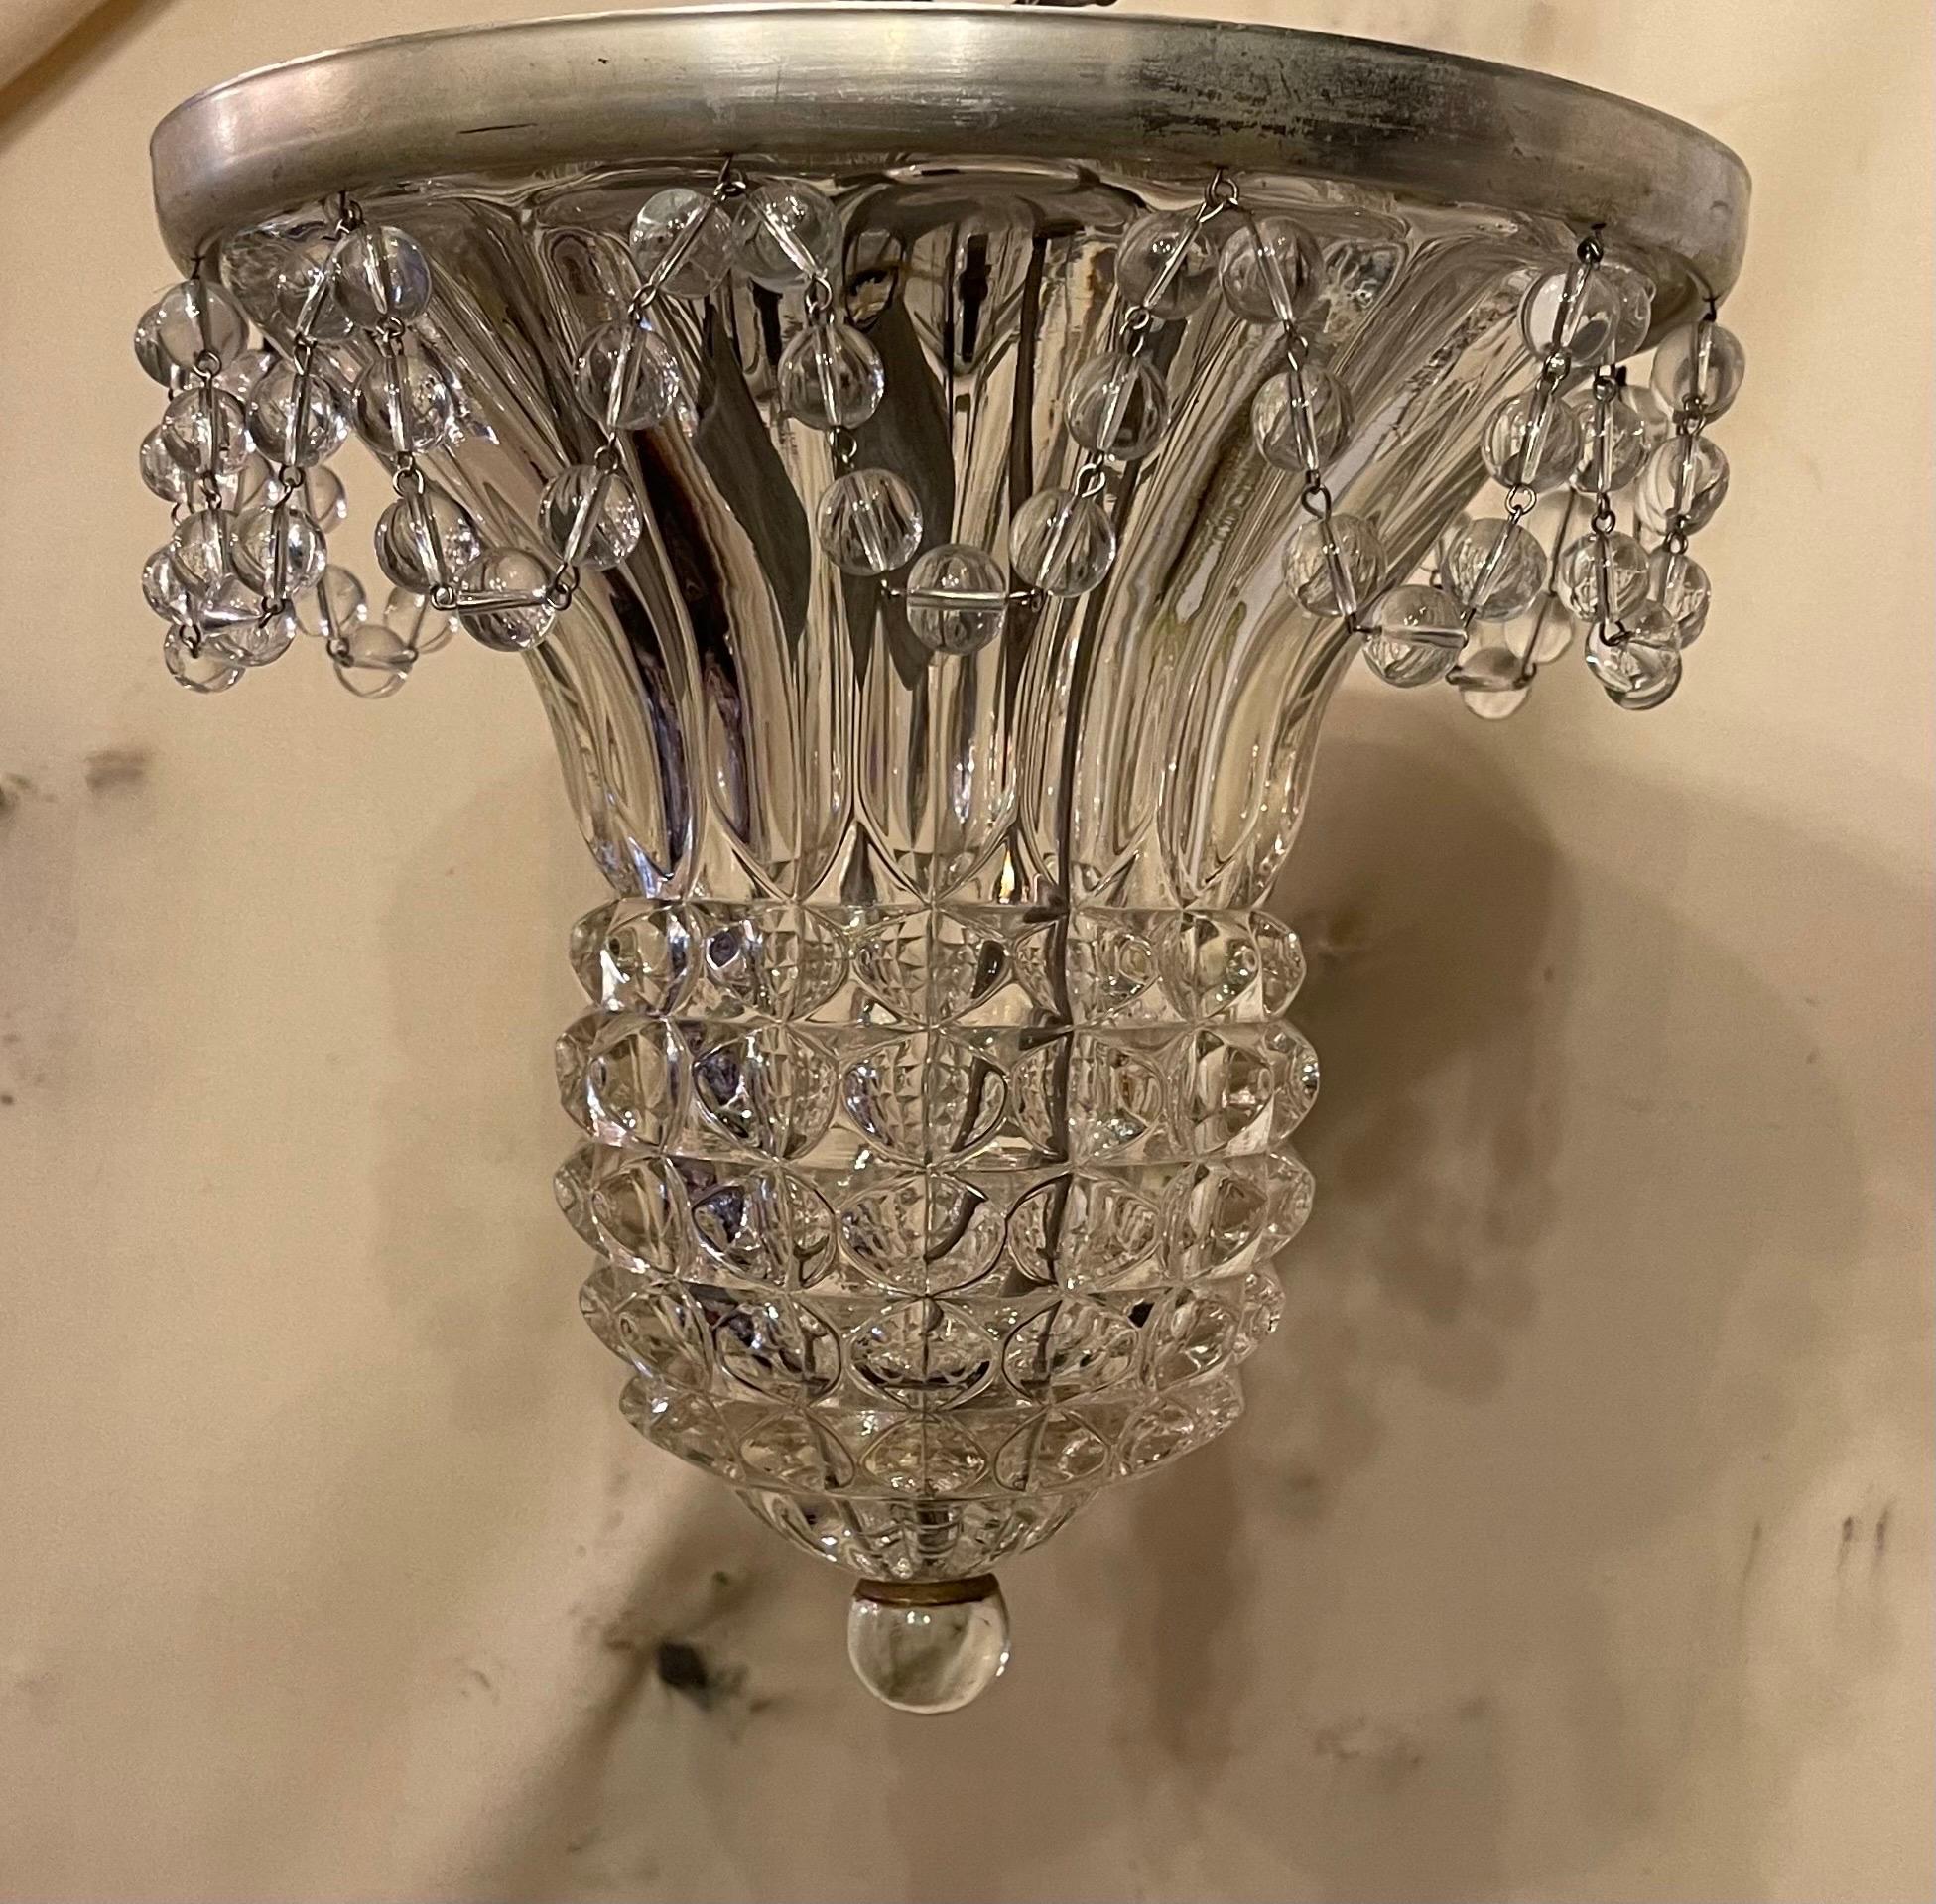 A Wonderful Cut Crystal / Glass Dome With Beaded Swag Petite Flush Mount Ceiling Light Fixture Completely Rewired And Ready To Install 